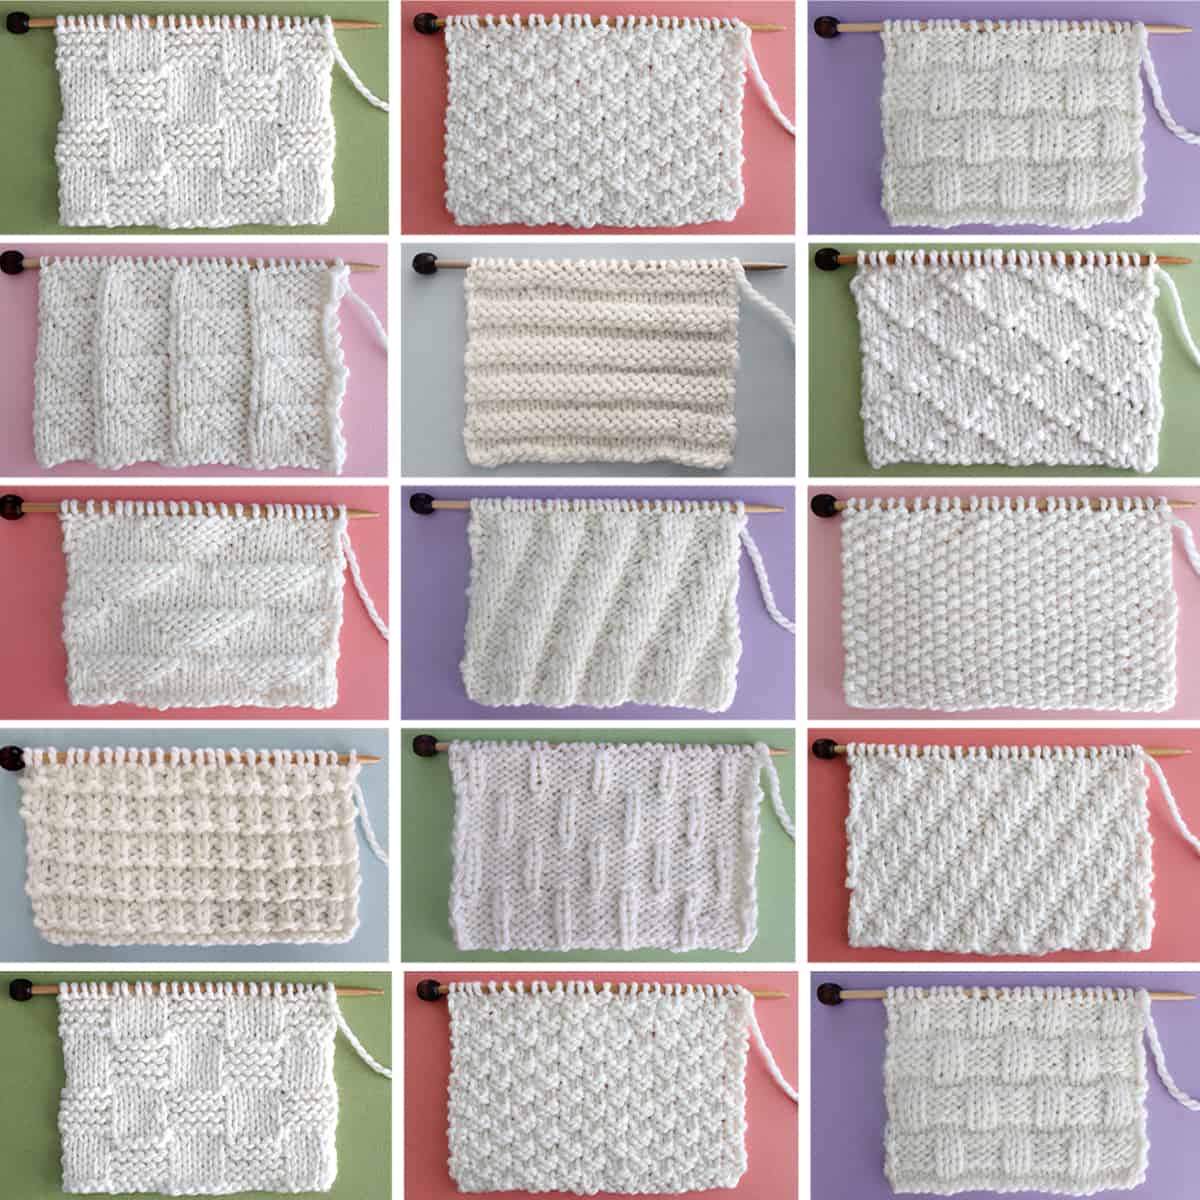 Collection of 12 knit stitch pattern textures in white yarn on knitting needles